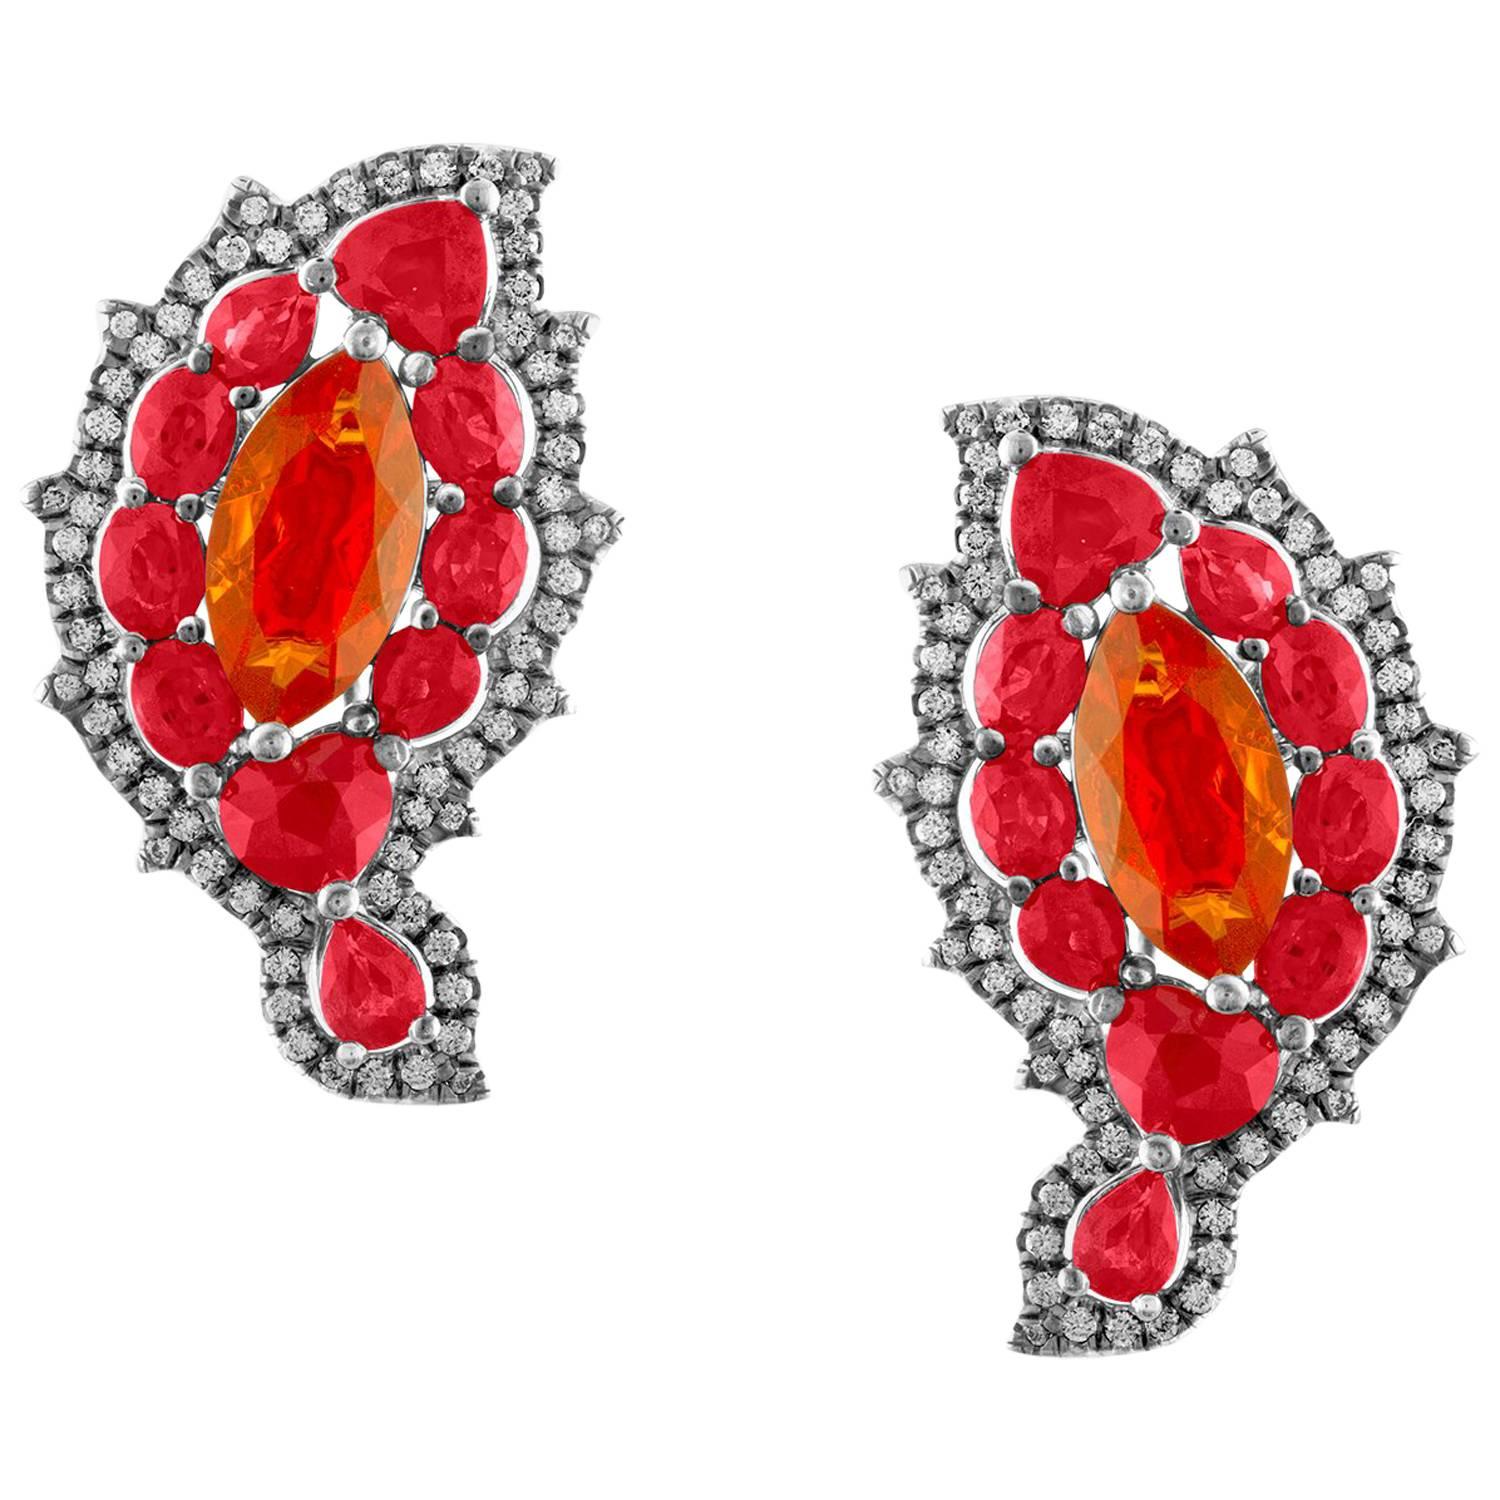 Bella Campbell/Campbellian Collection Magical Opal Ruby and Diamond Earrings